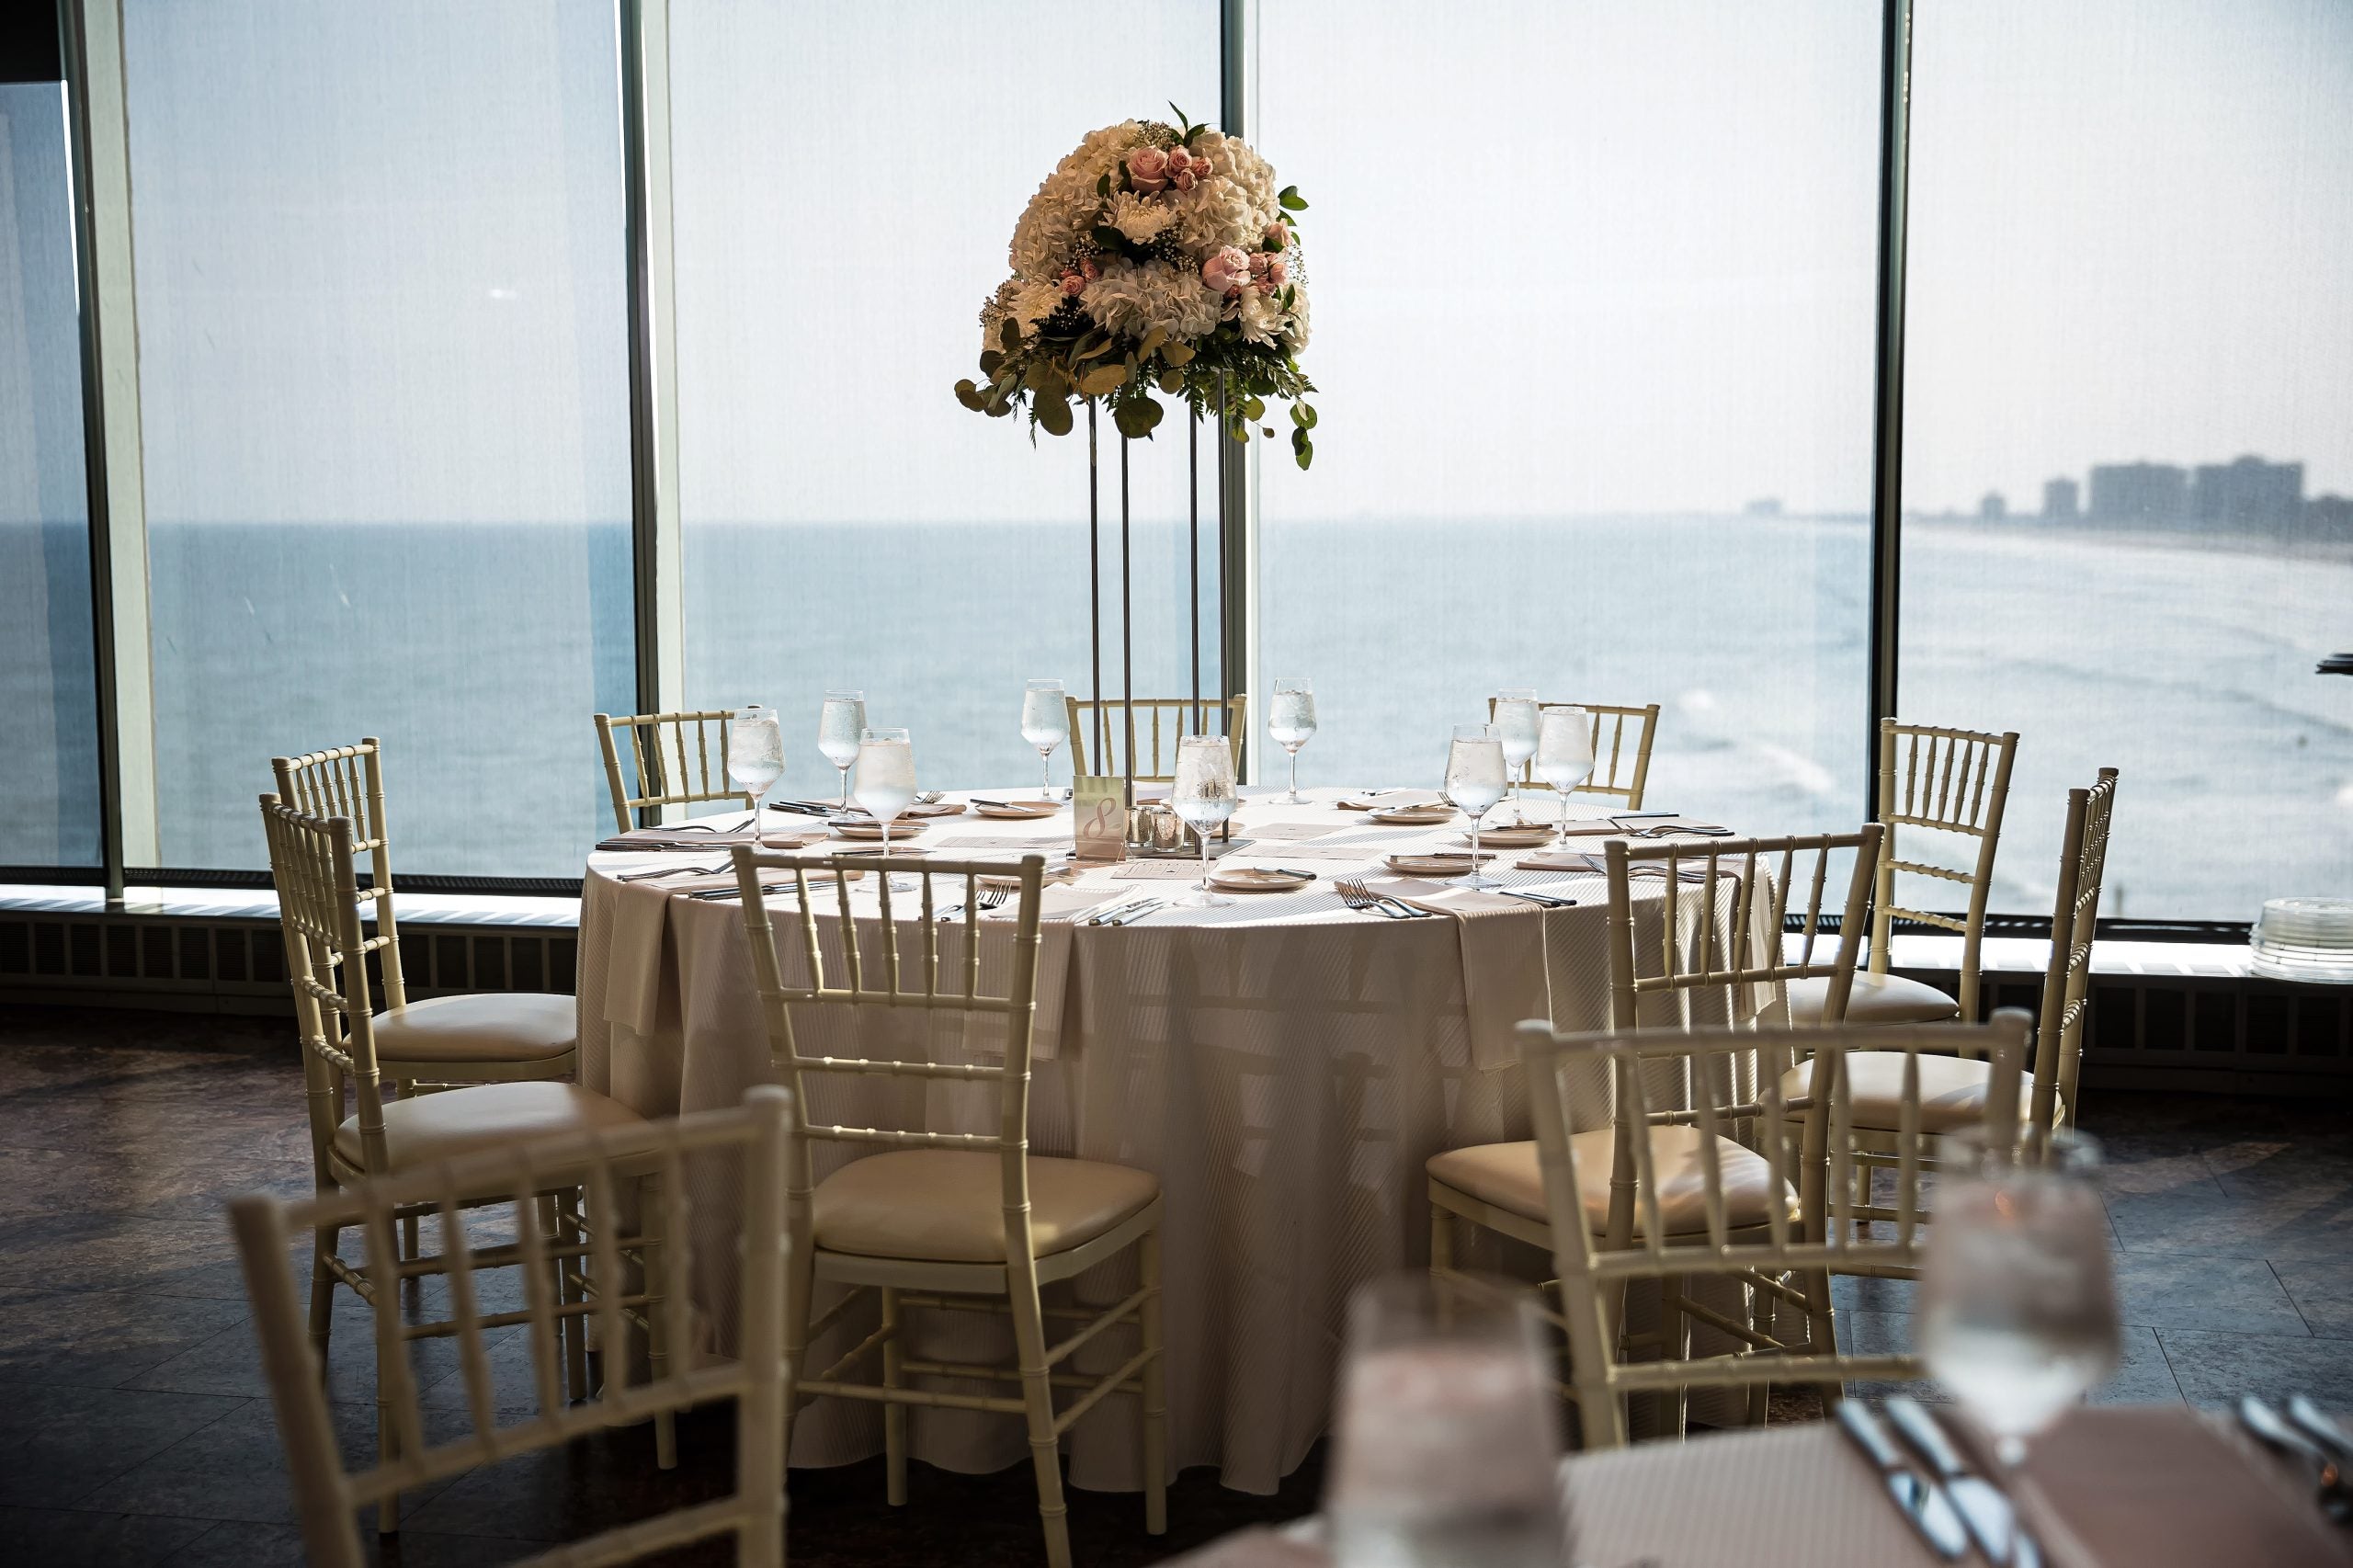 Bridal Bliss: Candice And Evan's Oceanside Wedding In Atlantic City Was A "Dream" Come True